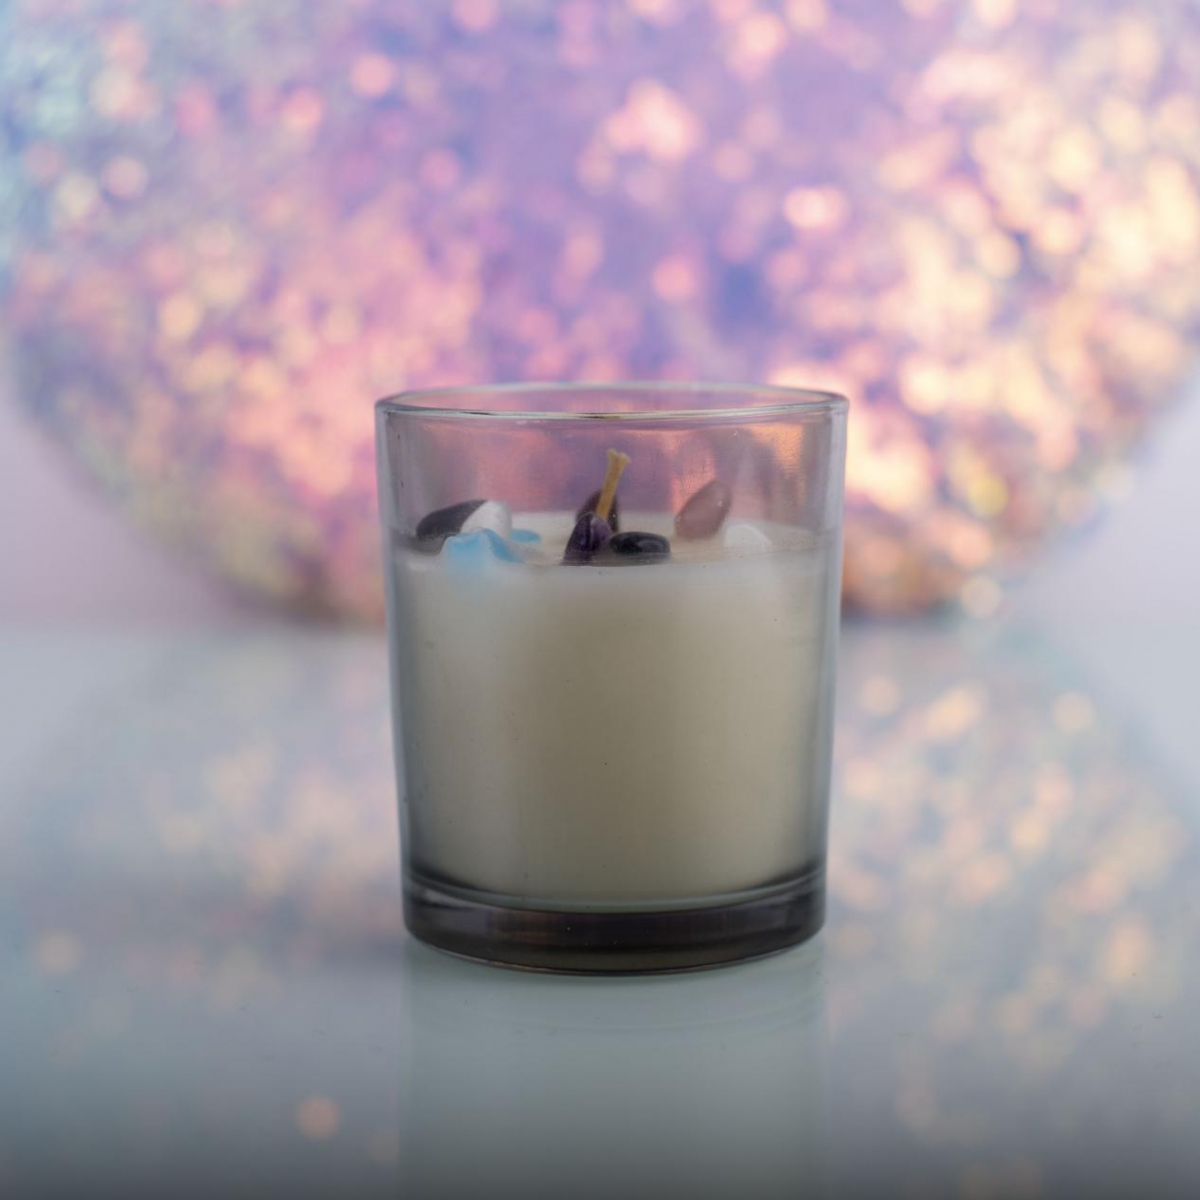 Jewellery Candles ：Colorful Gem Candles, Grey Candle Jar , Meditation , China Factory, Best Price-HOWCANDLE-Candles,Scented Candles,Aromatherapy Candles,Soy Candles,Vegan Candles,Jar Candles,Pillar Candles,Candle Gift Sets,Essential Oils,Reed Diffuser,Candle Holder,